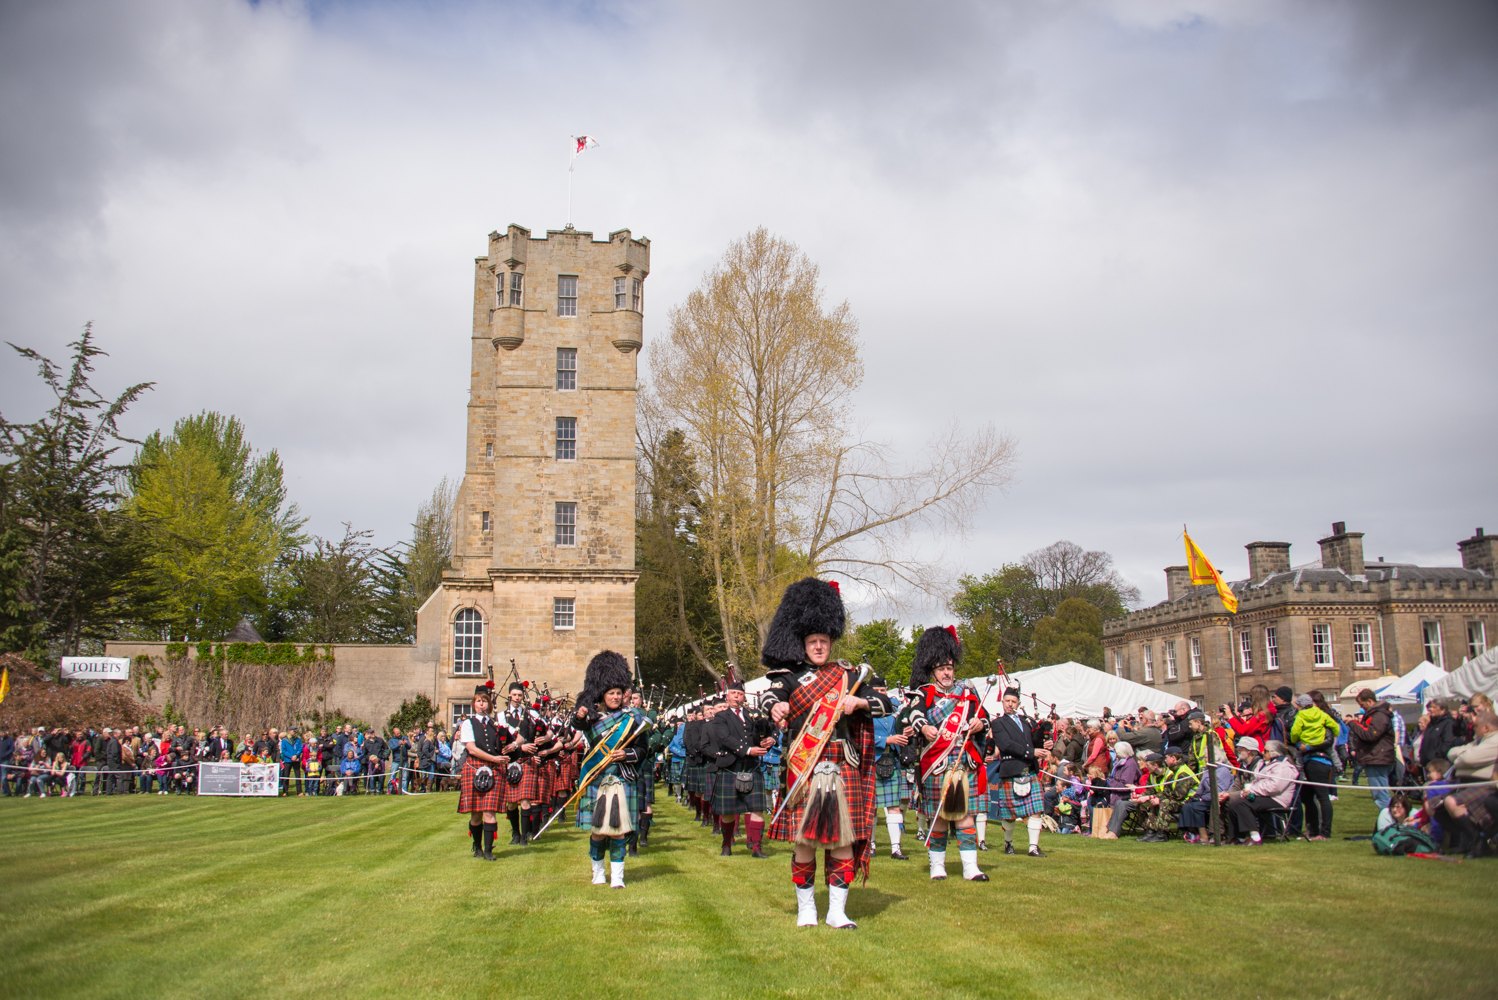 Gordon Castle Scotland thanks everyone who attended their Highland Games &#038; Country Fair on Sunday 15th May!